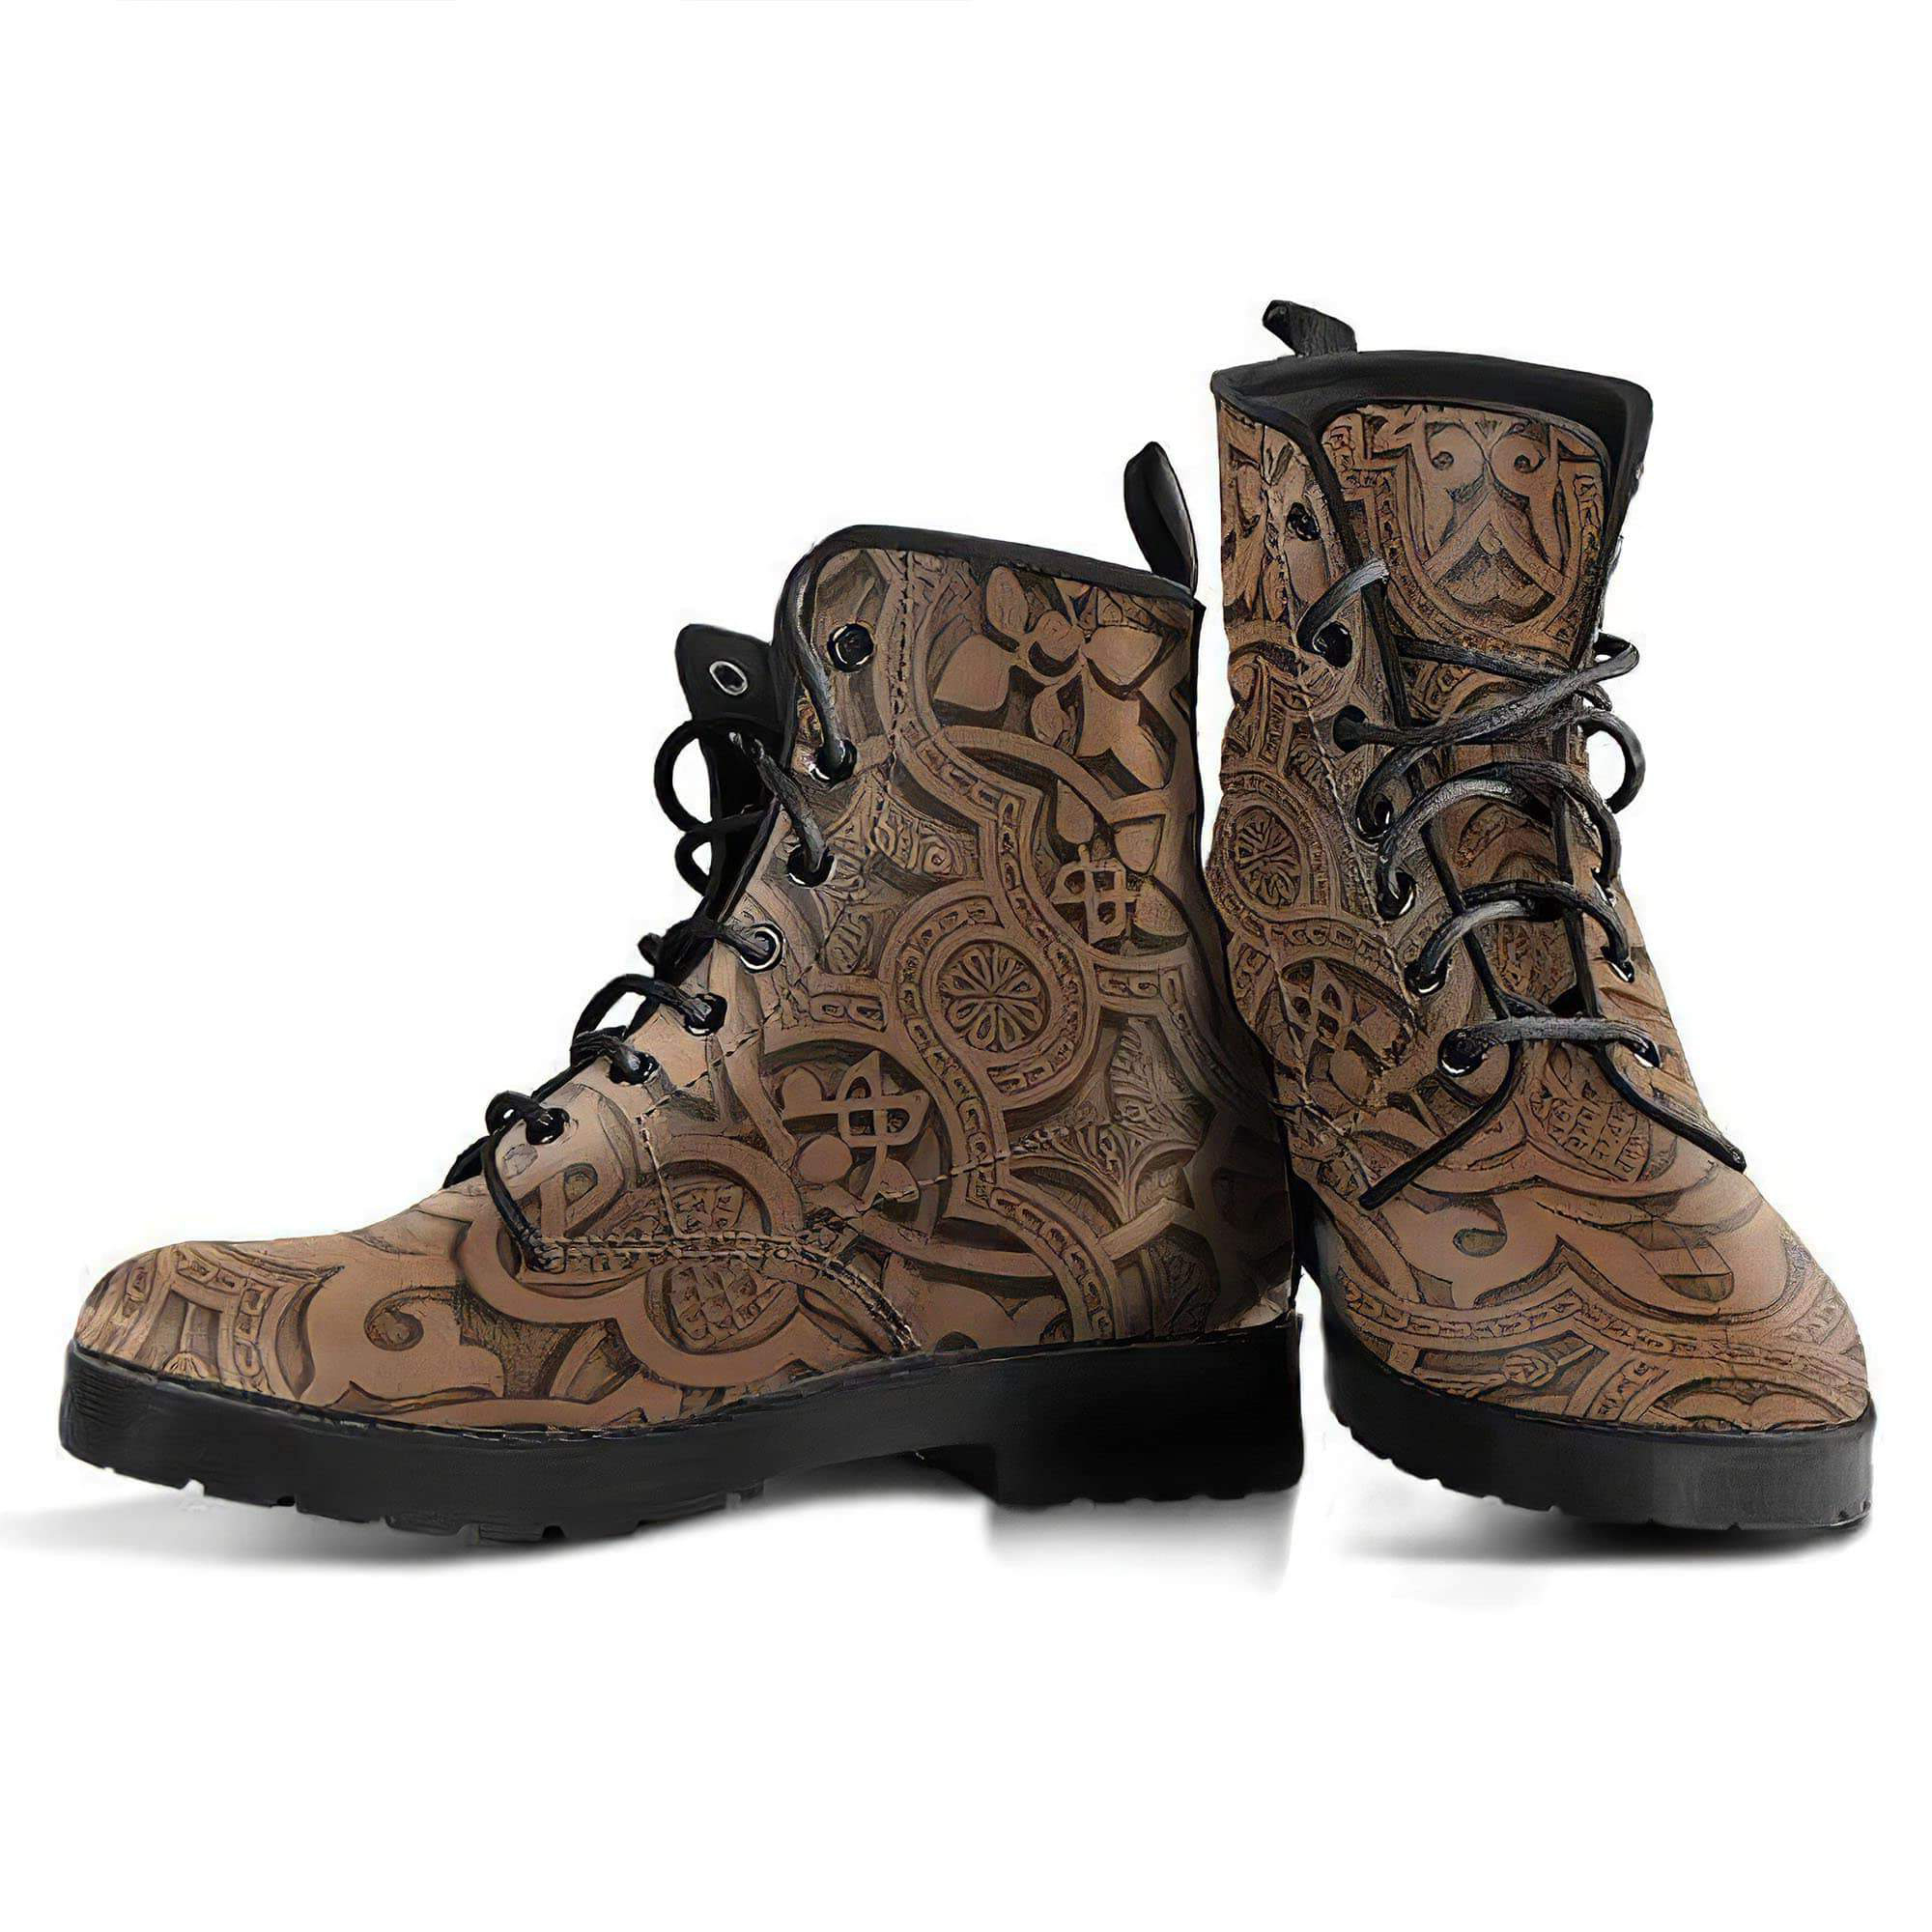 vintage-mandala-ceilings-in-spicy-mix-leather-boots-for-women-women-s-leather-boots-12051972390973.jpg